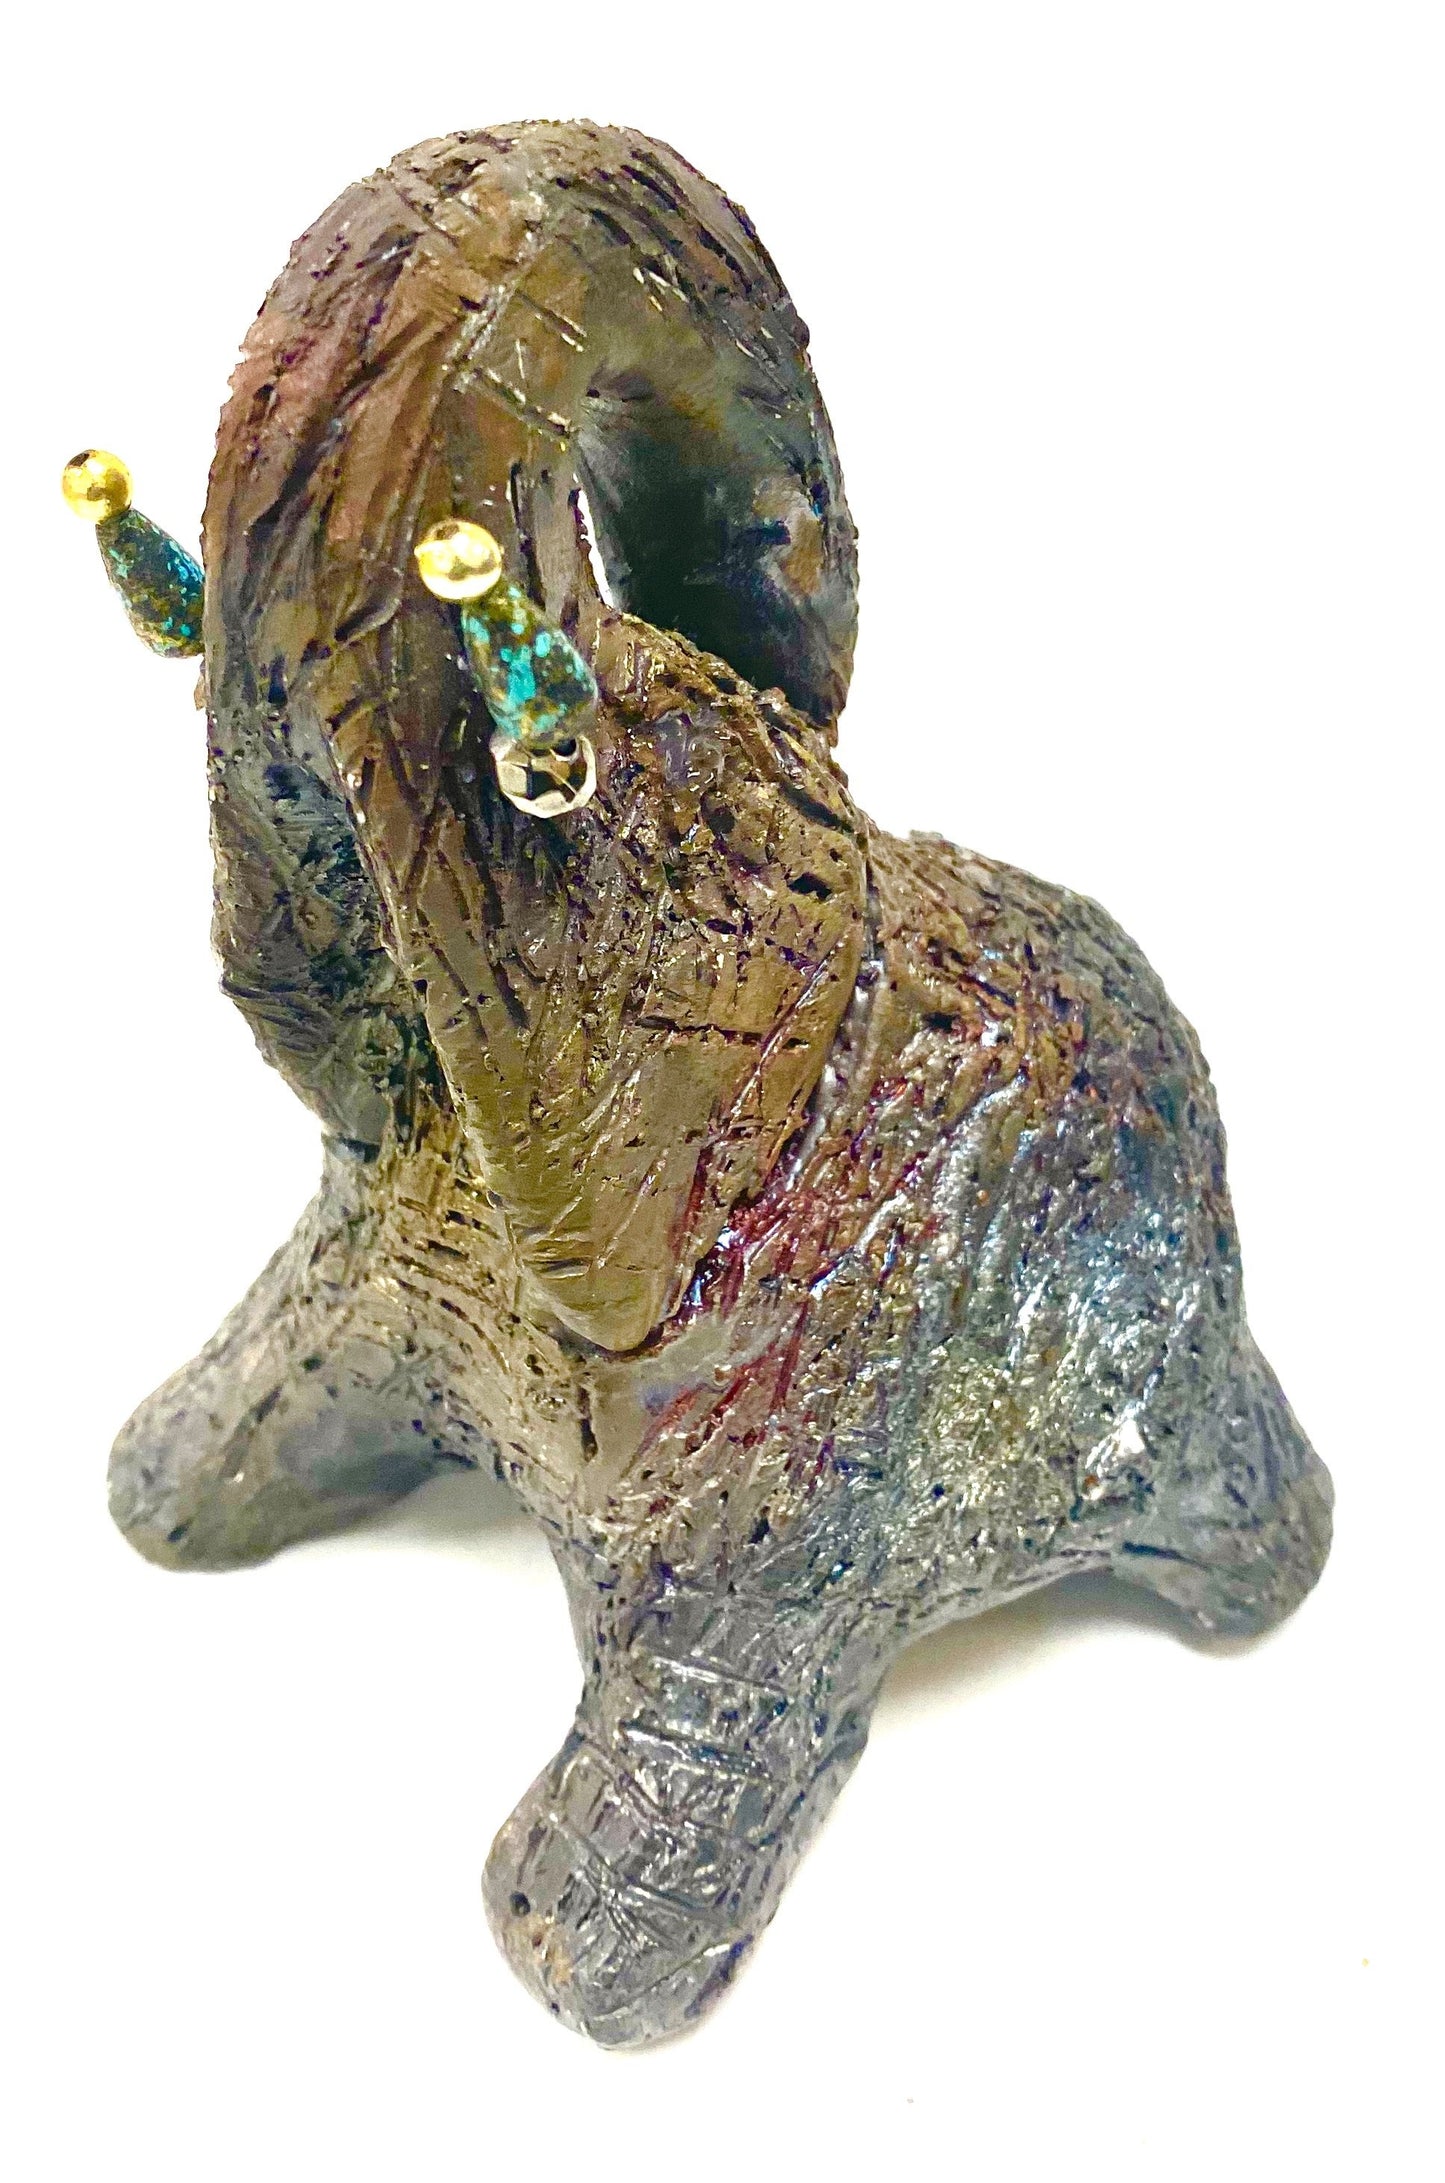 Have you HERD!!!!!!     Elephants are one of my favorite animals to create. They are so majestic"  Just one of these lovely Raku Fired Elephant will make an excellent gift for your  BFF,  or just for you .    This raku fired baby elephant sits 5.5" x 4" x 4" and weighs 10 ounces. She has beaded tusks and a textured copper body.  This little baby is Nice!